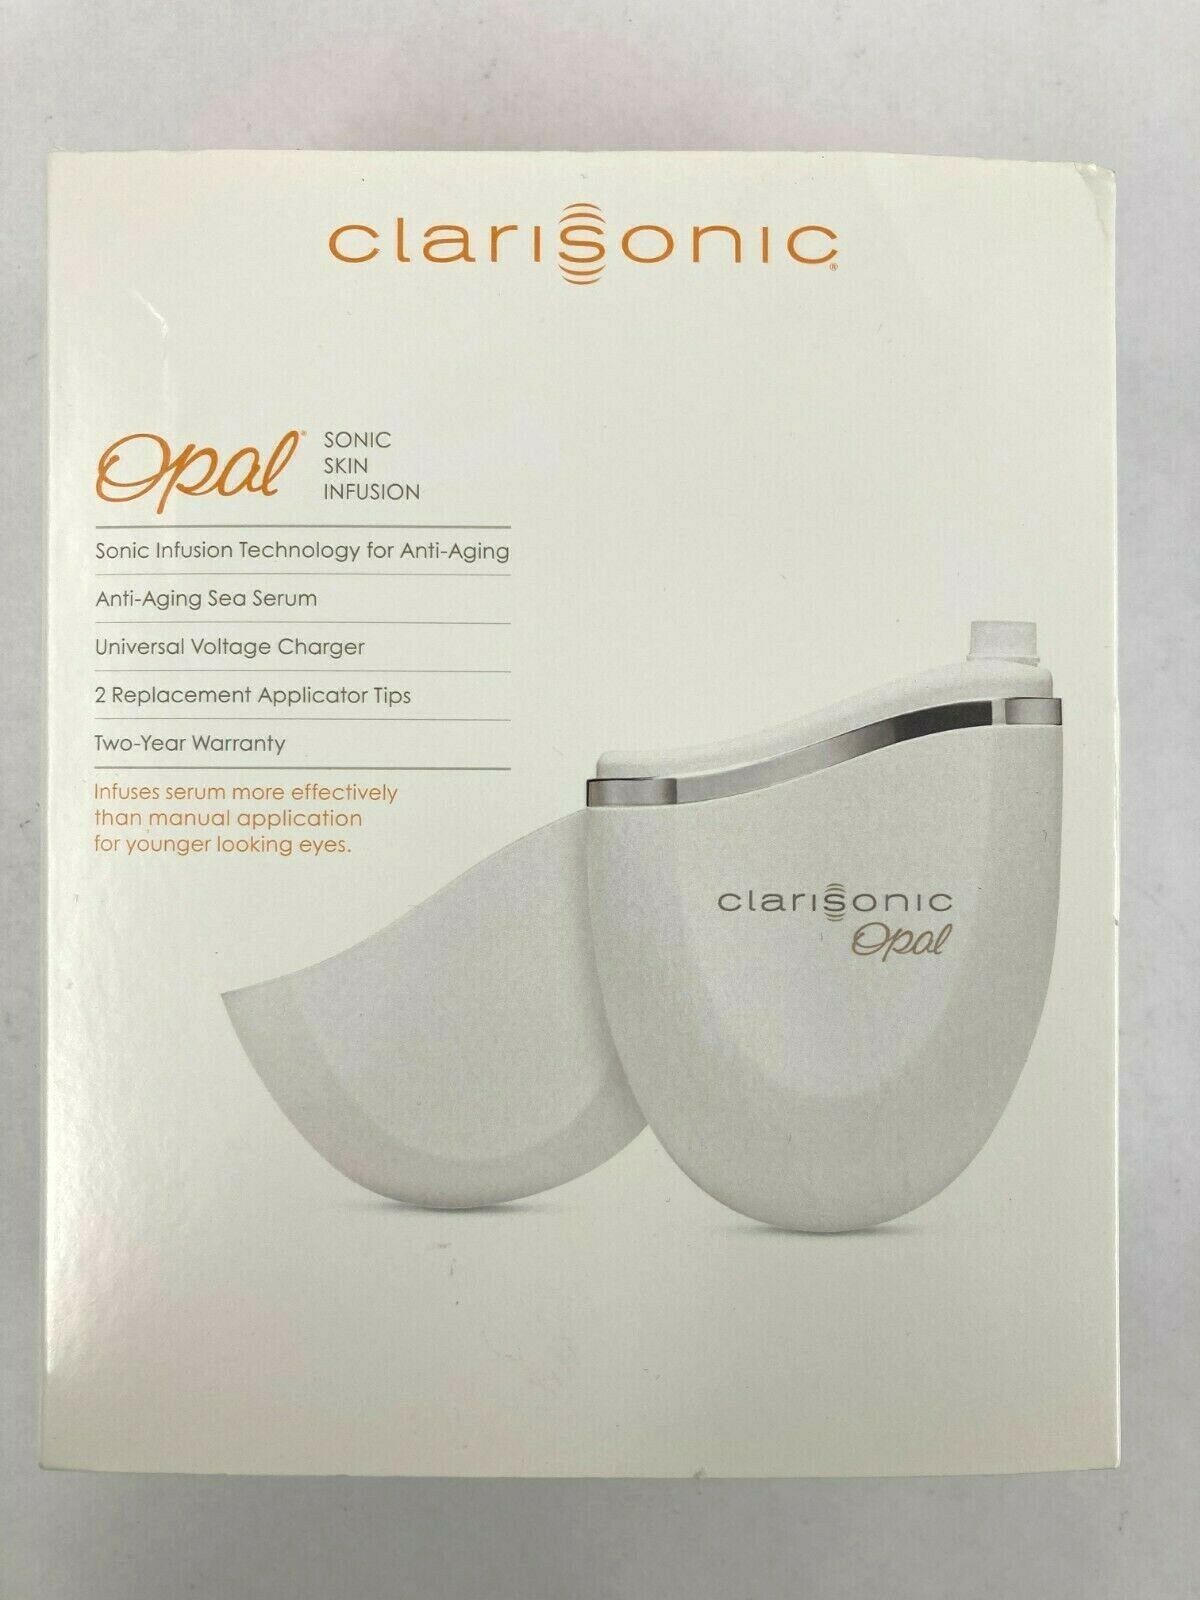 Clarisonic Opal Sonic Skin Infusion Technology For Antiaging System No Serum